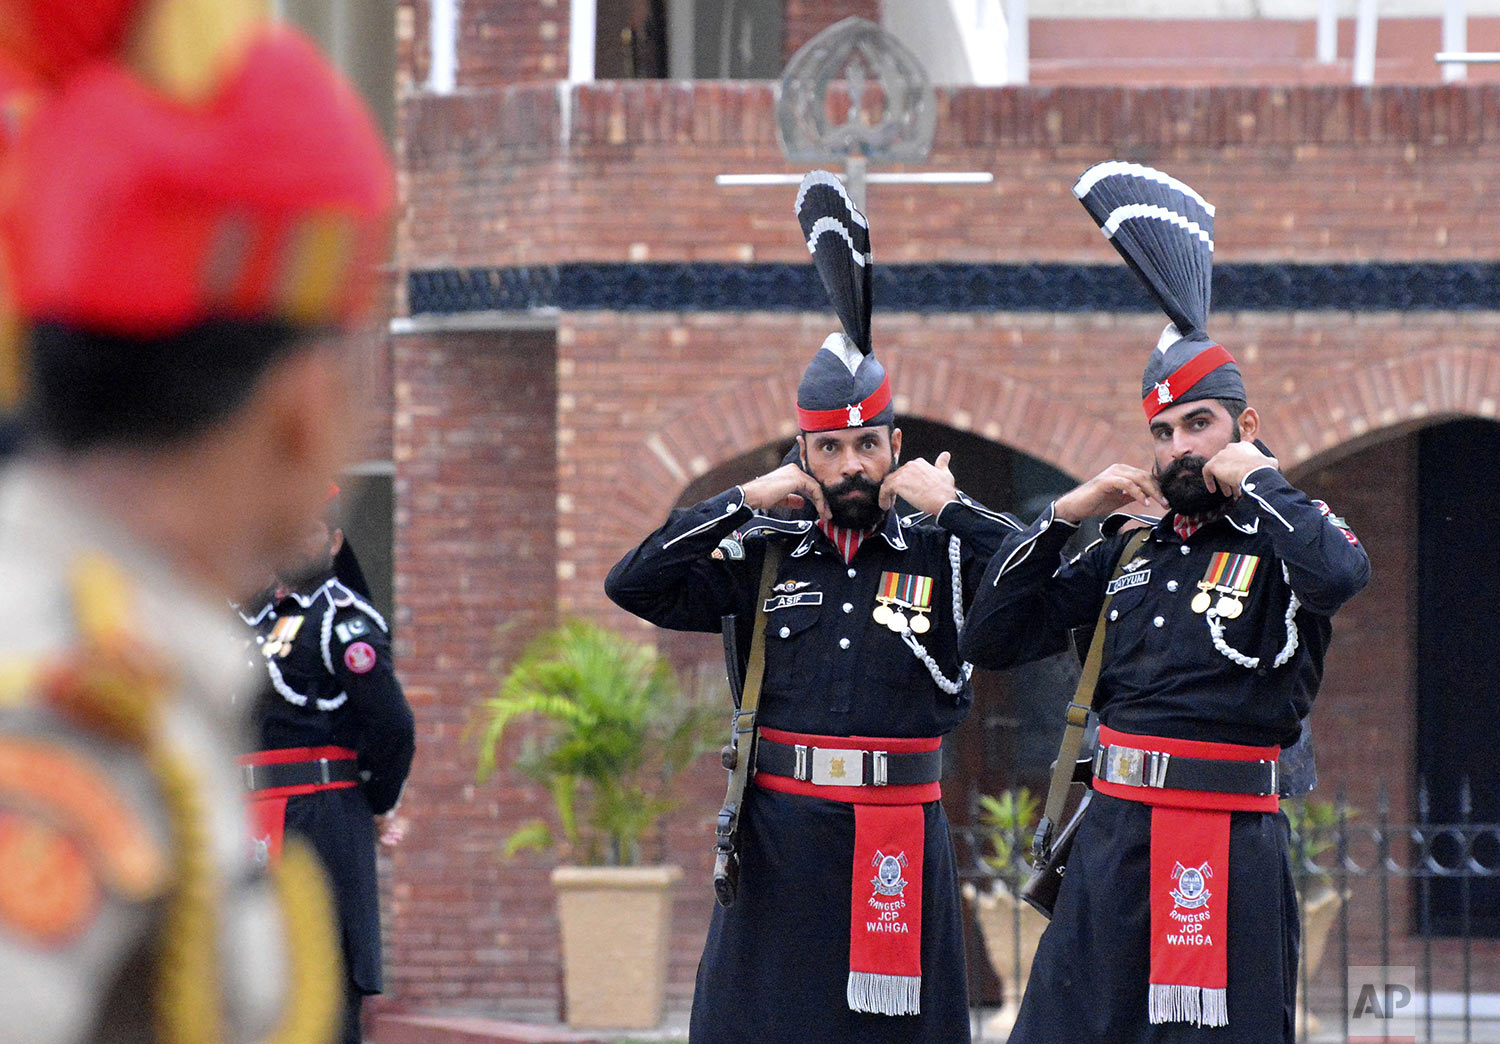  Pakistan Rangers soldiers face Indian Border Security Force soldiers at a daily closing ceremony on the Indian side of the Attari-Wagah border, Friday, Aug. 9, 2019. (AP Photo/Prabhjot Gill) 